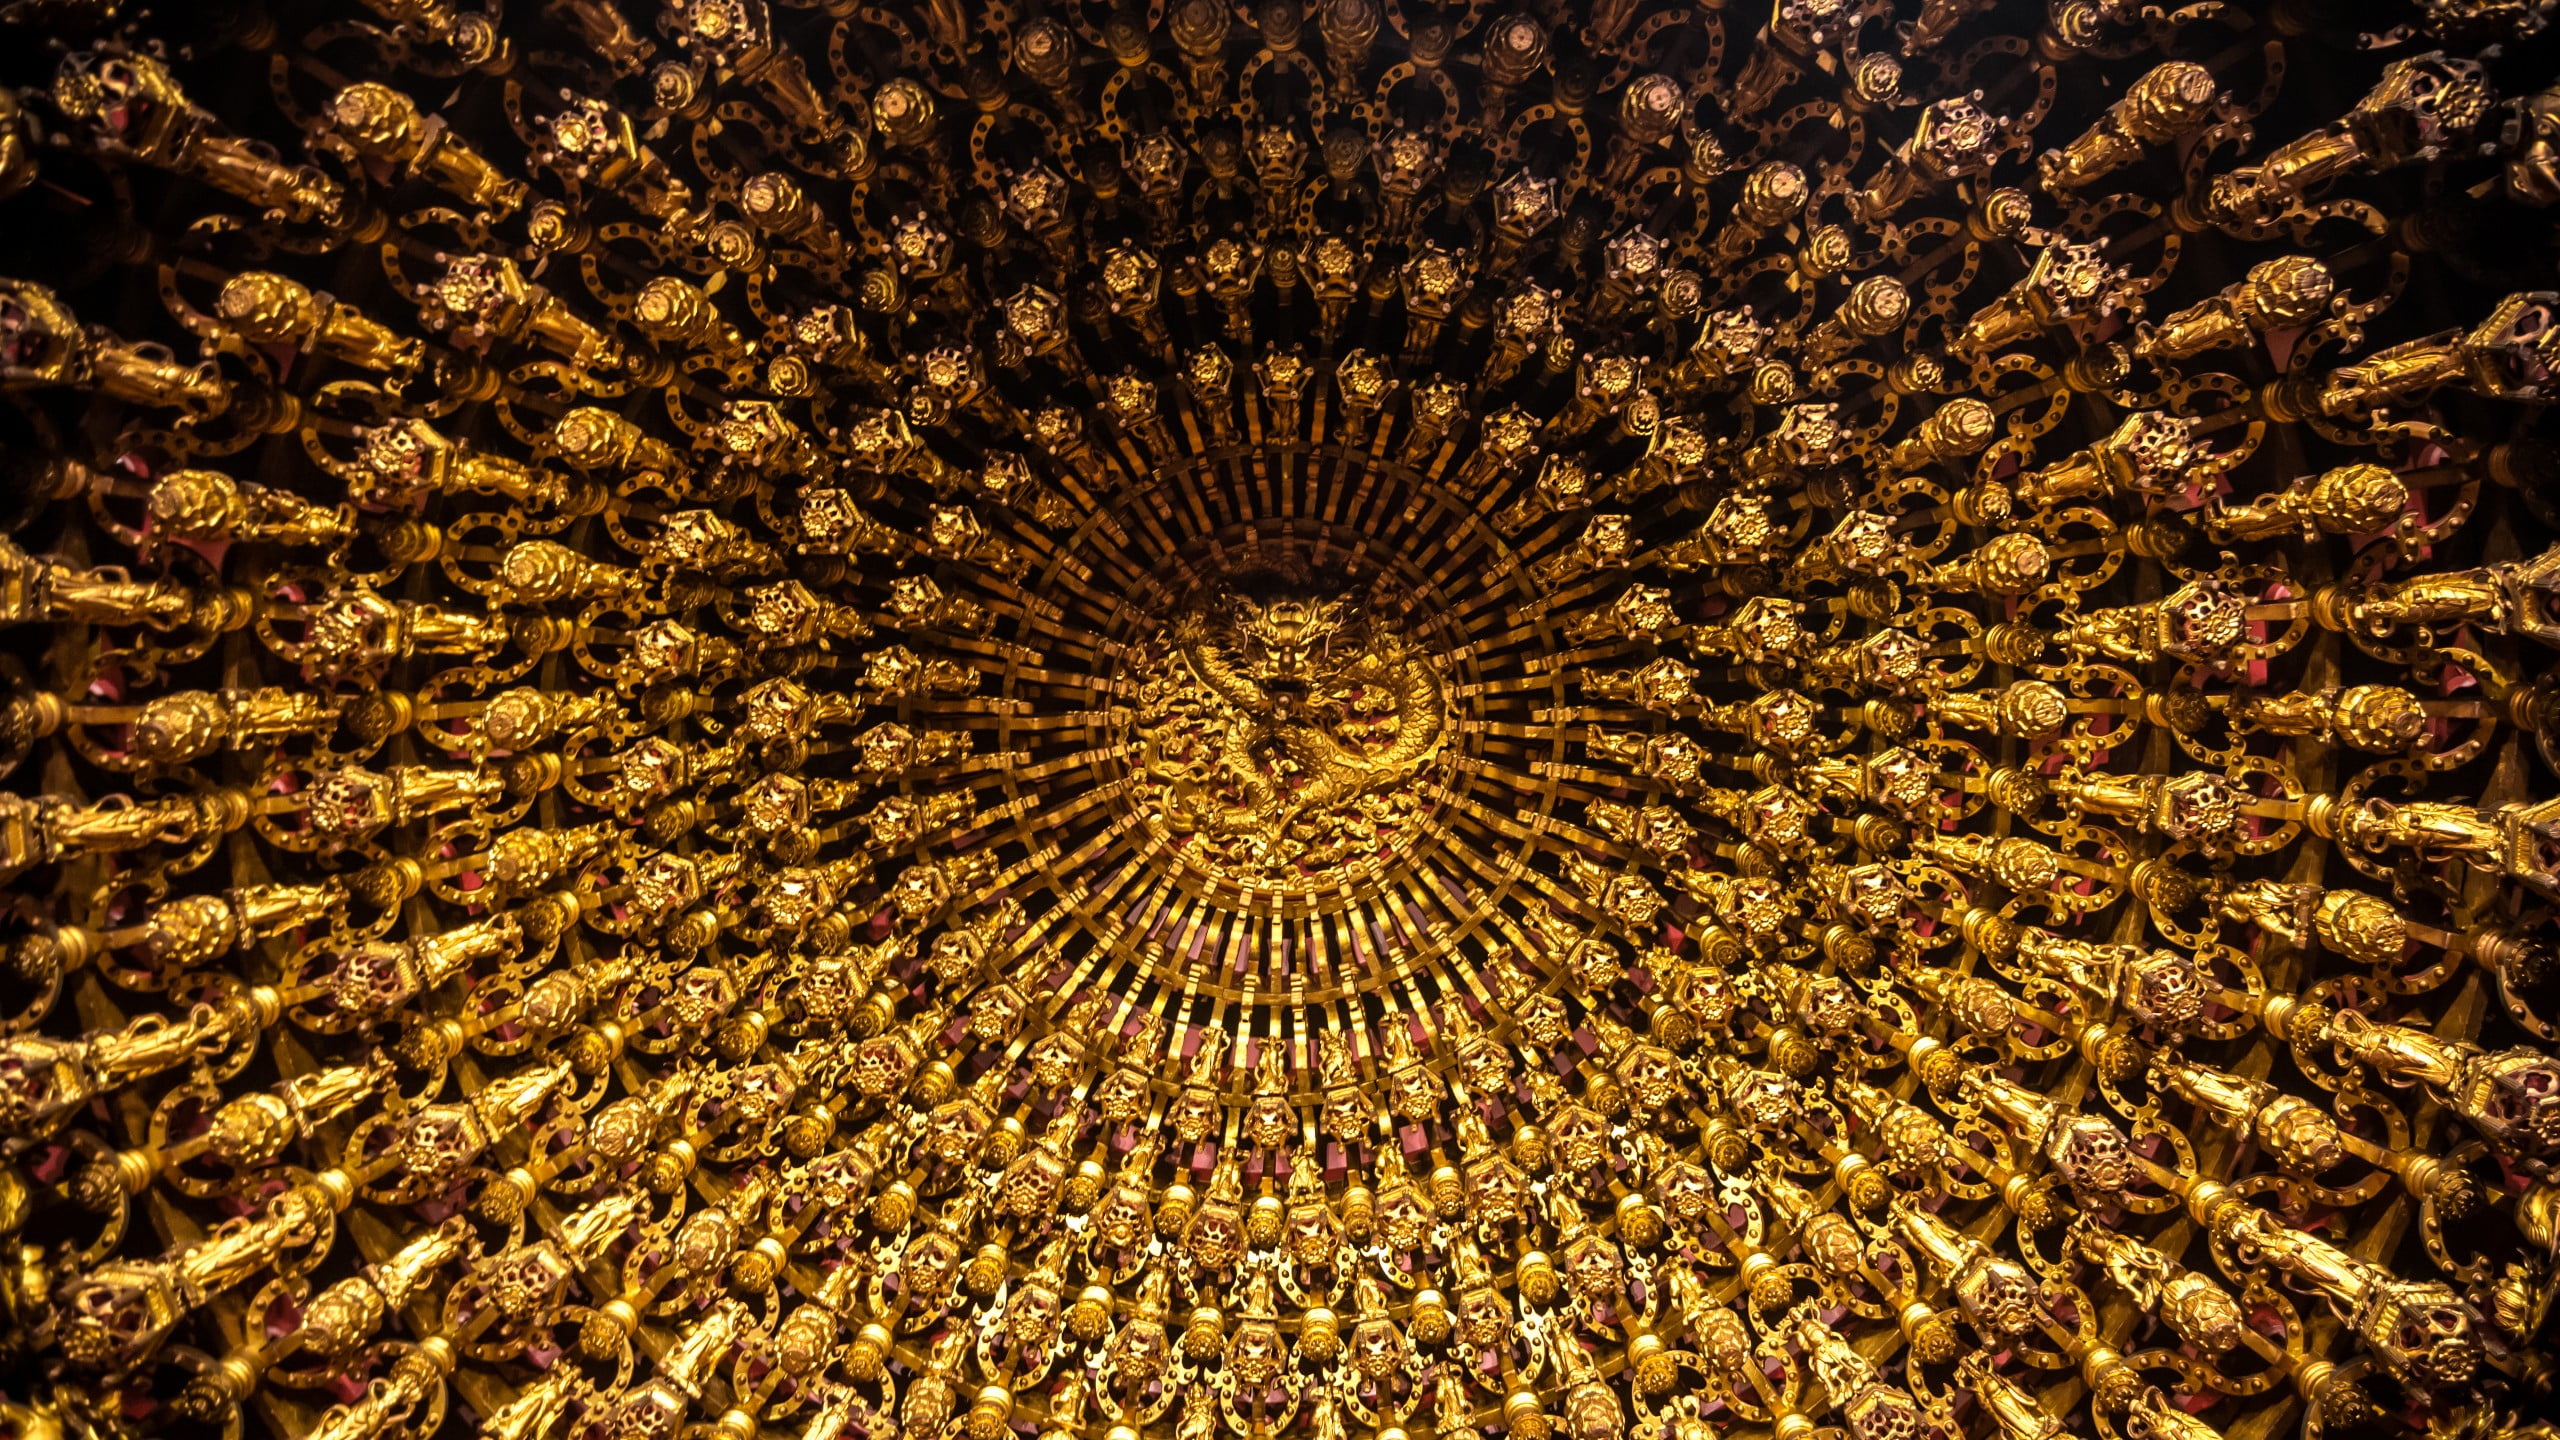 gold wall decor, Taiwan, temple, dragon, full frame, backgrounds